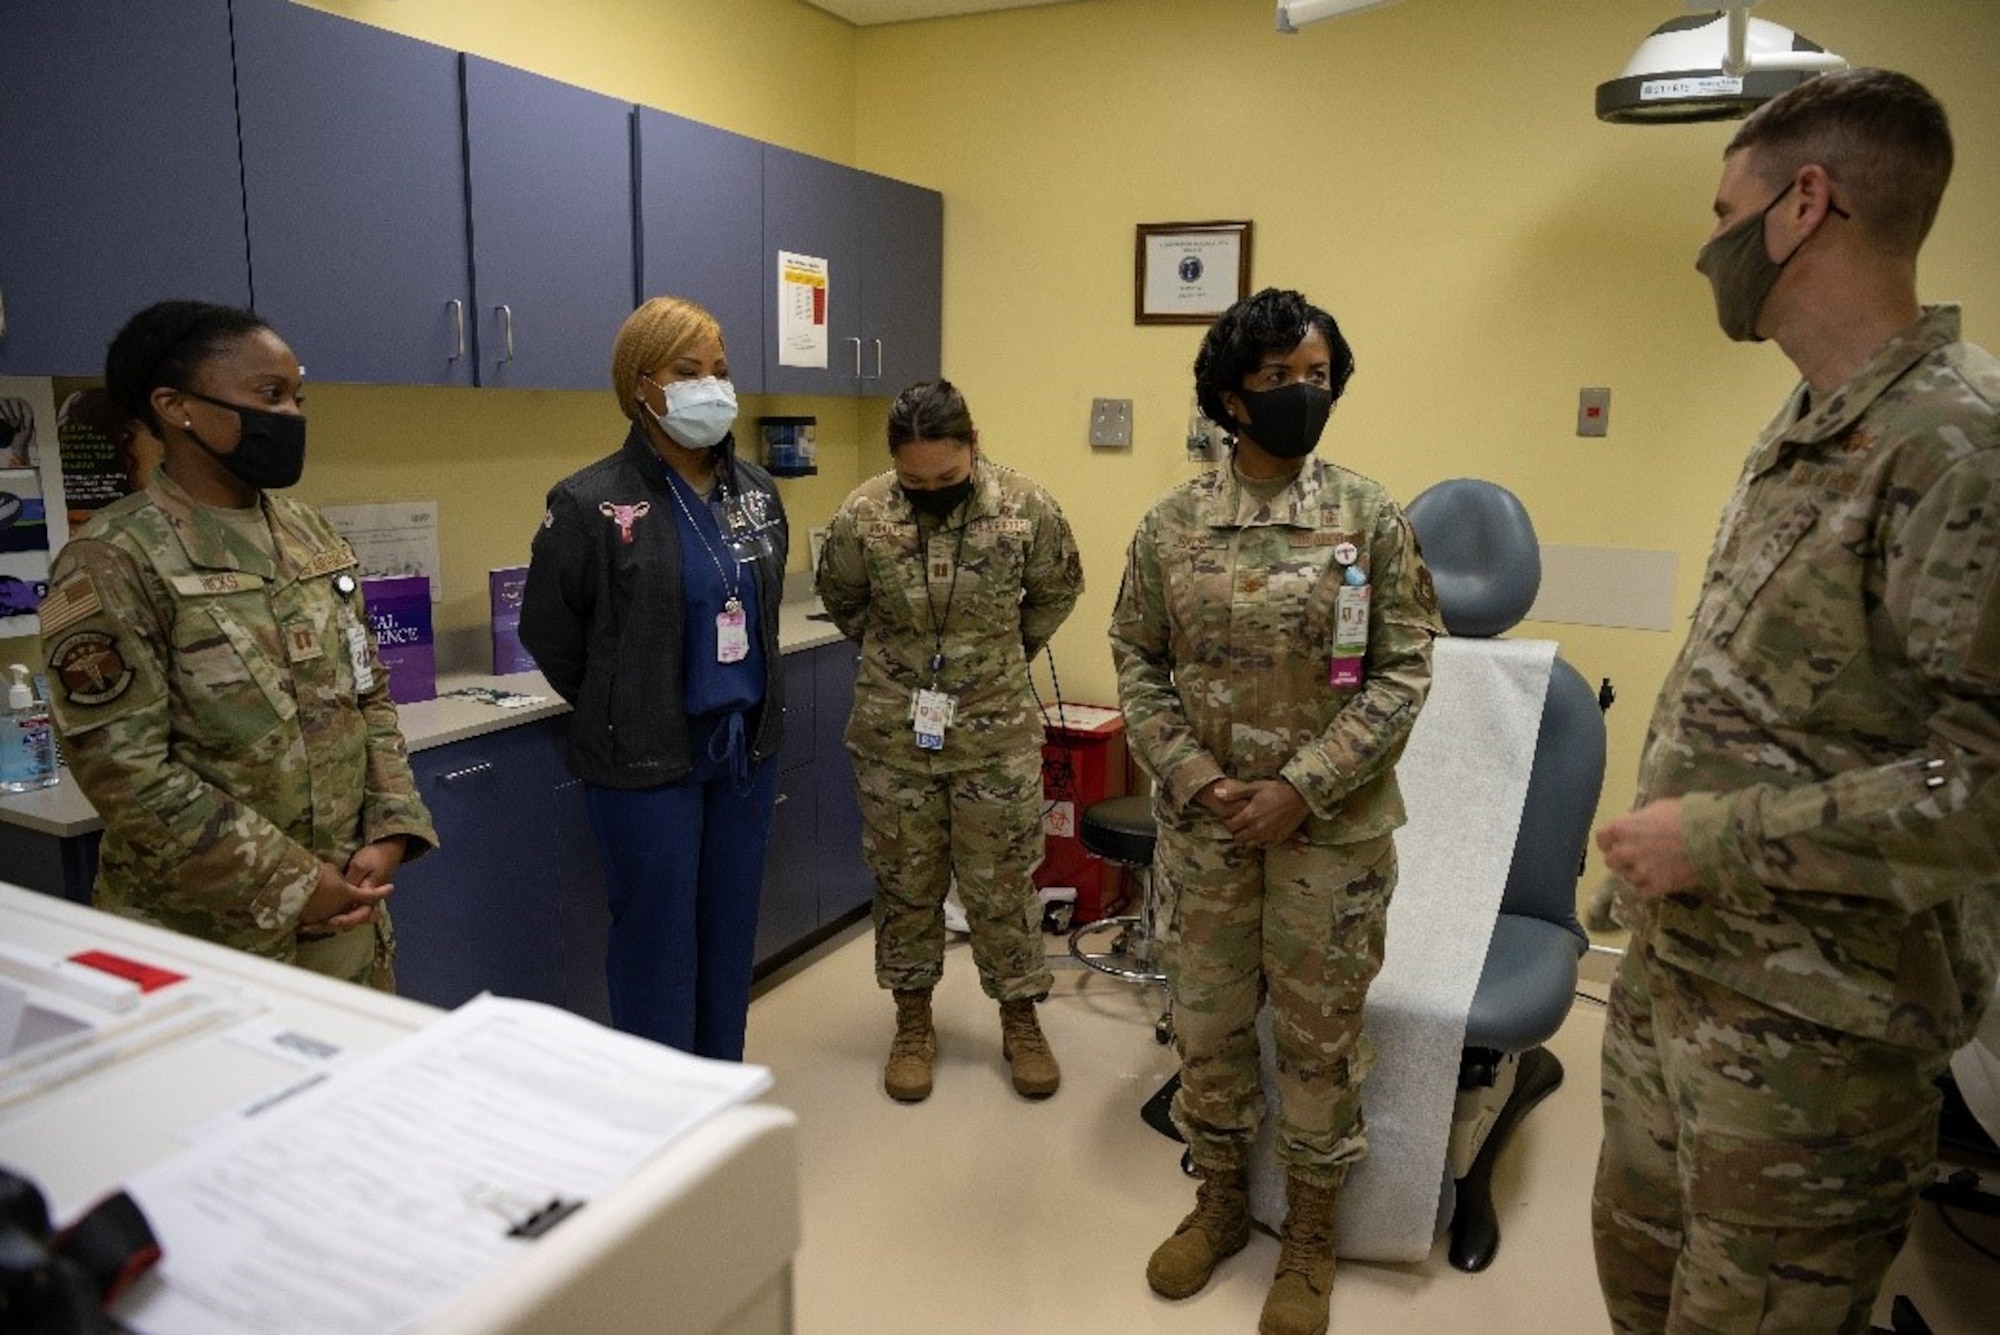 Five service members standing in a medical room talking.